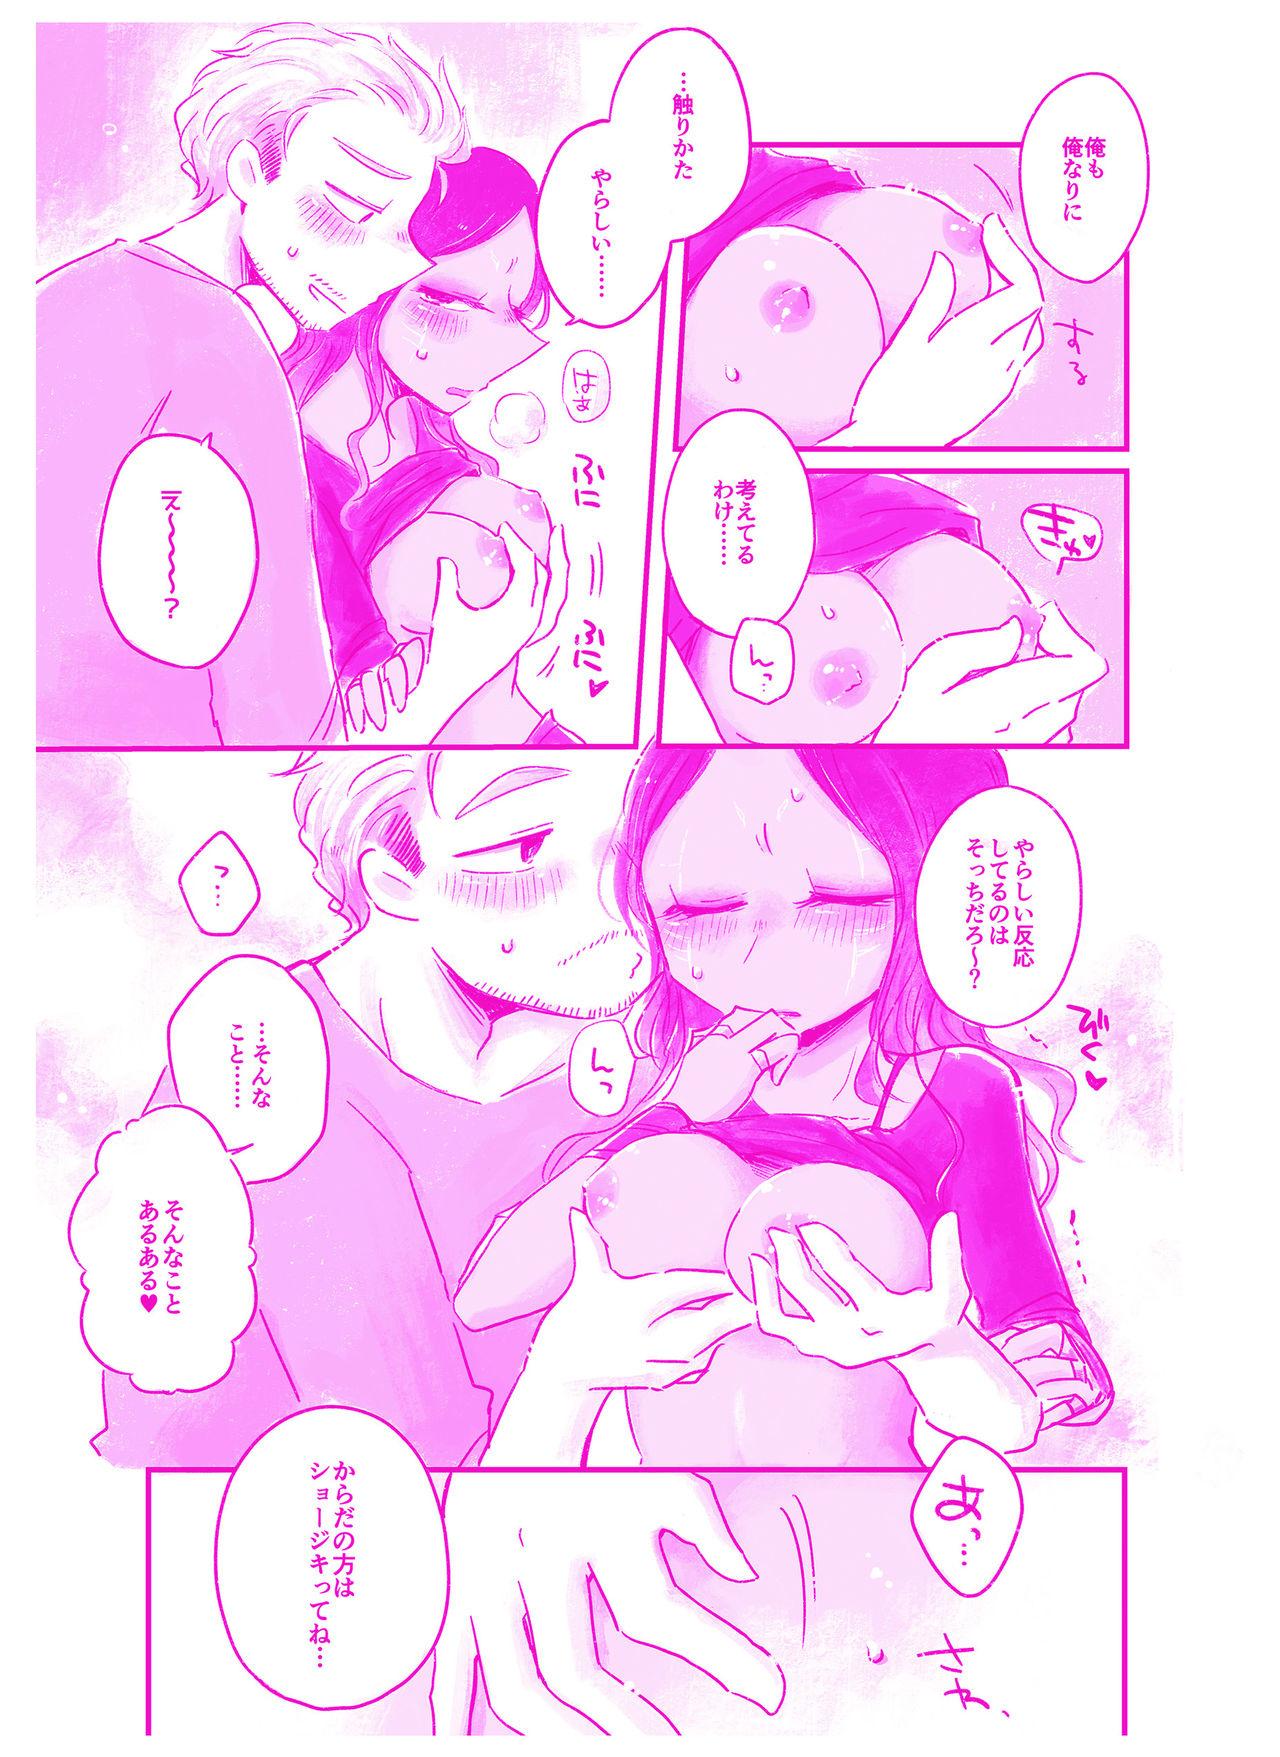 Soloboy 言われてみてえもんだ - Guardians of the galaxy Softcore - Page 6